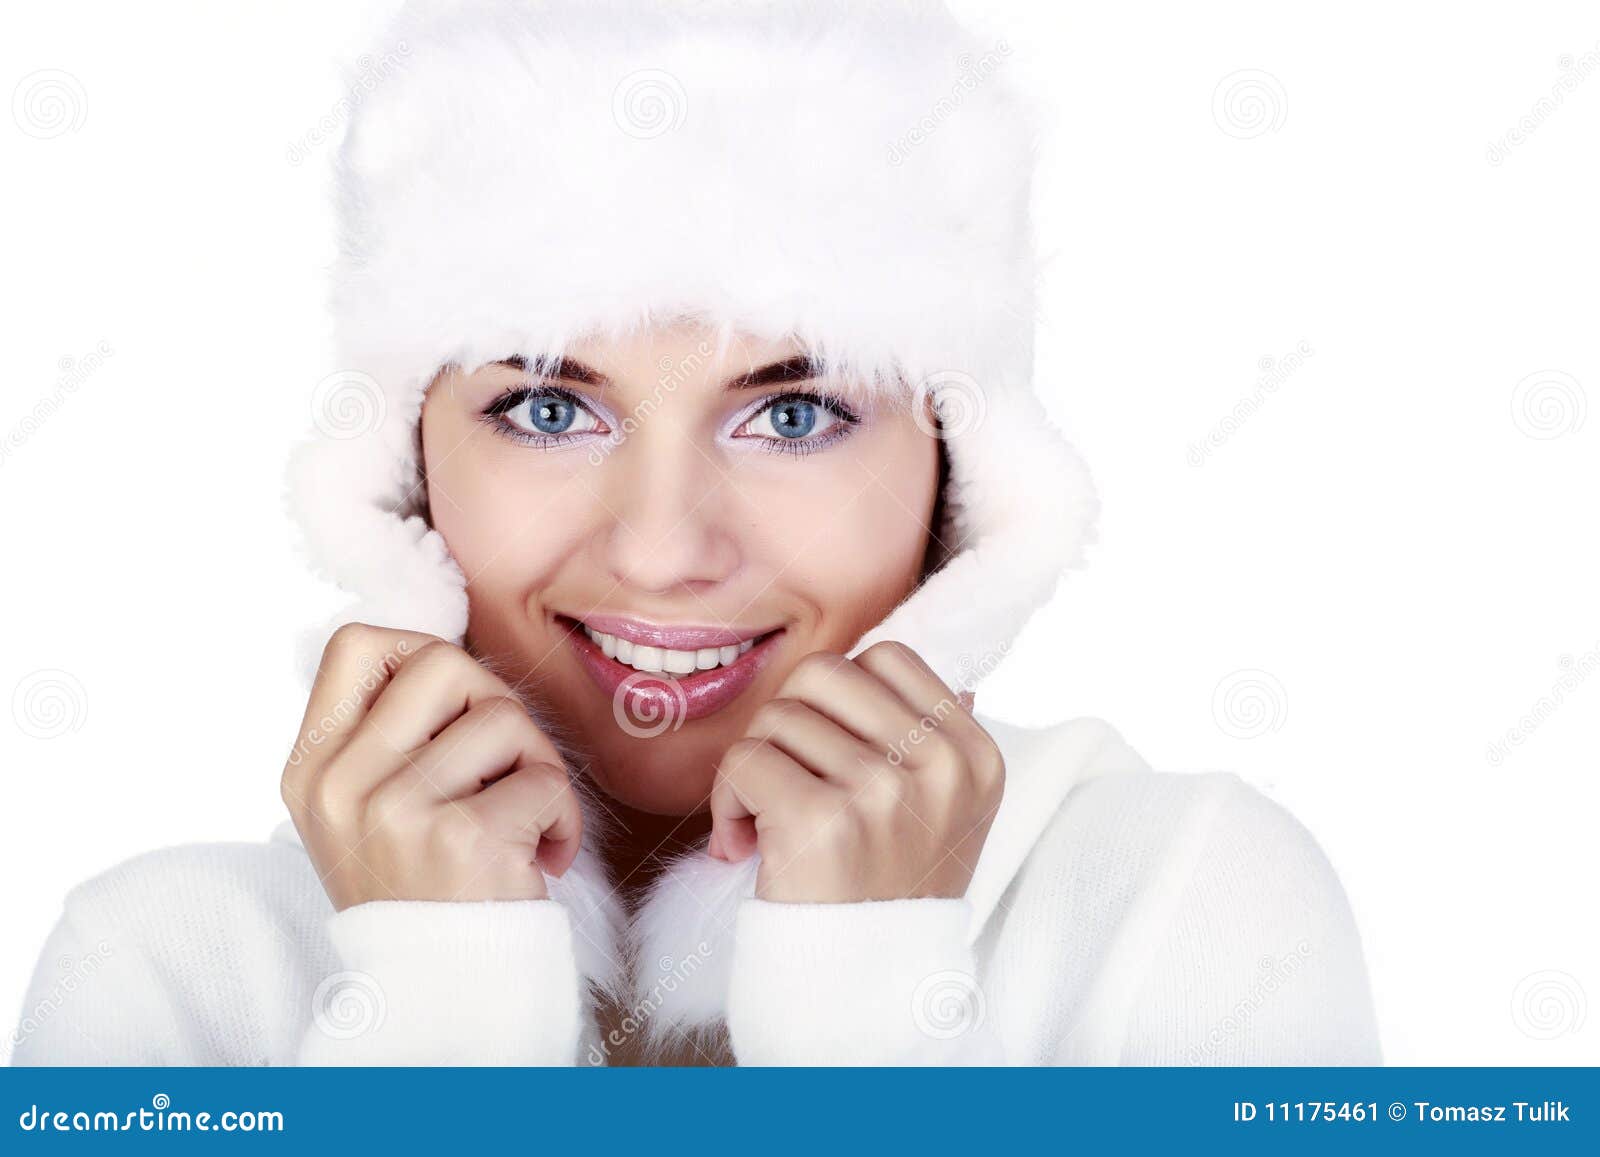 Smiling Winter Woman. Blue Eyes Stock Image - Image of hands, girl ...